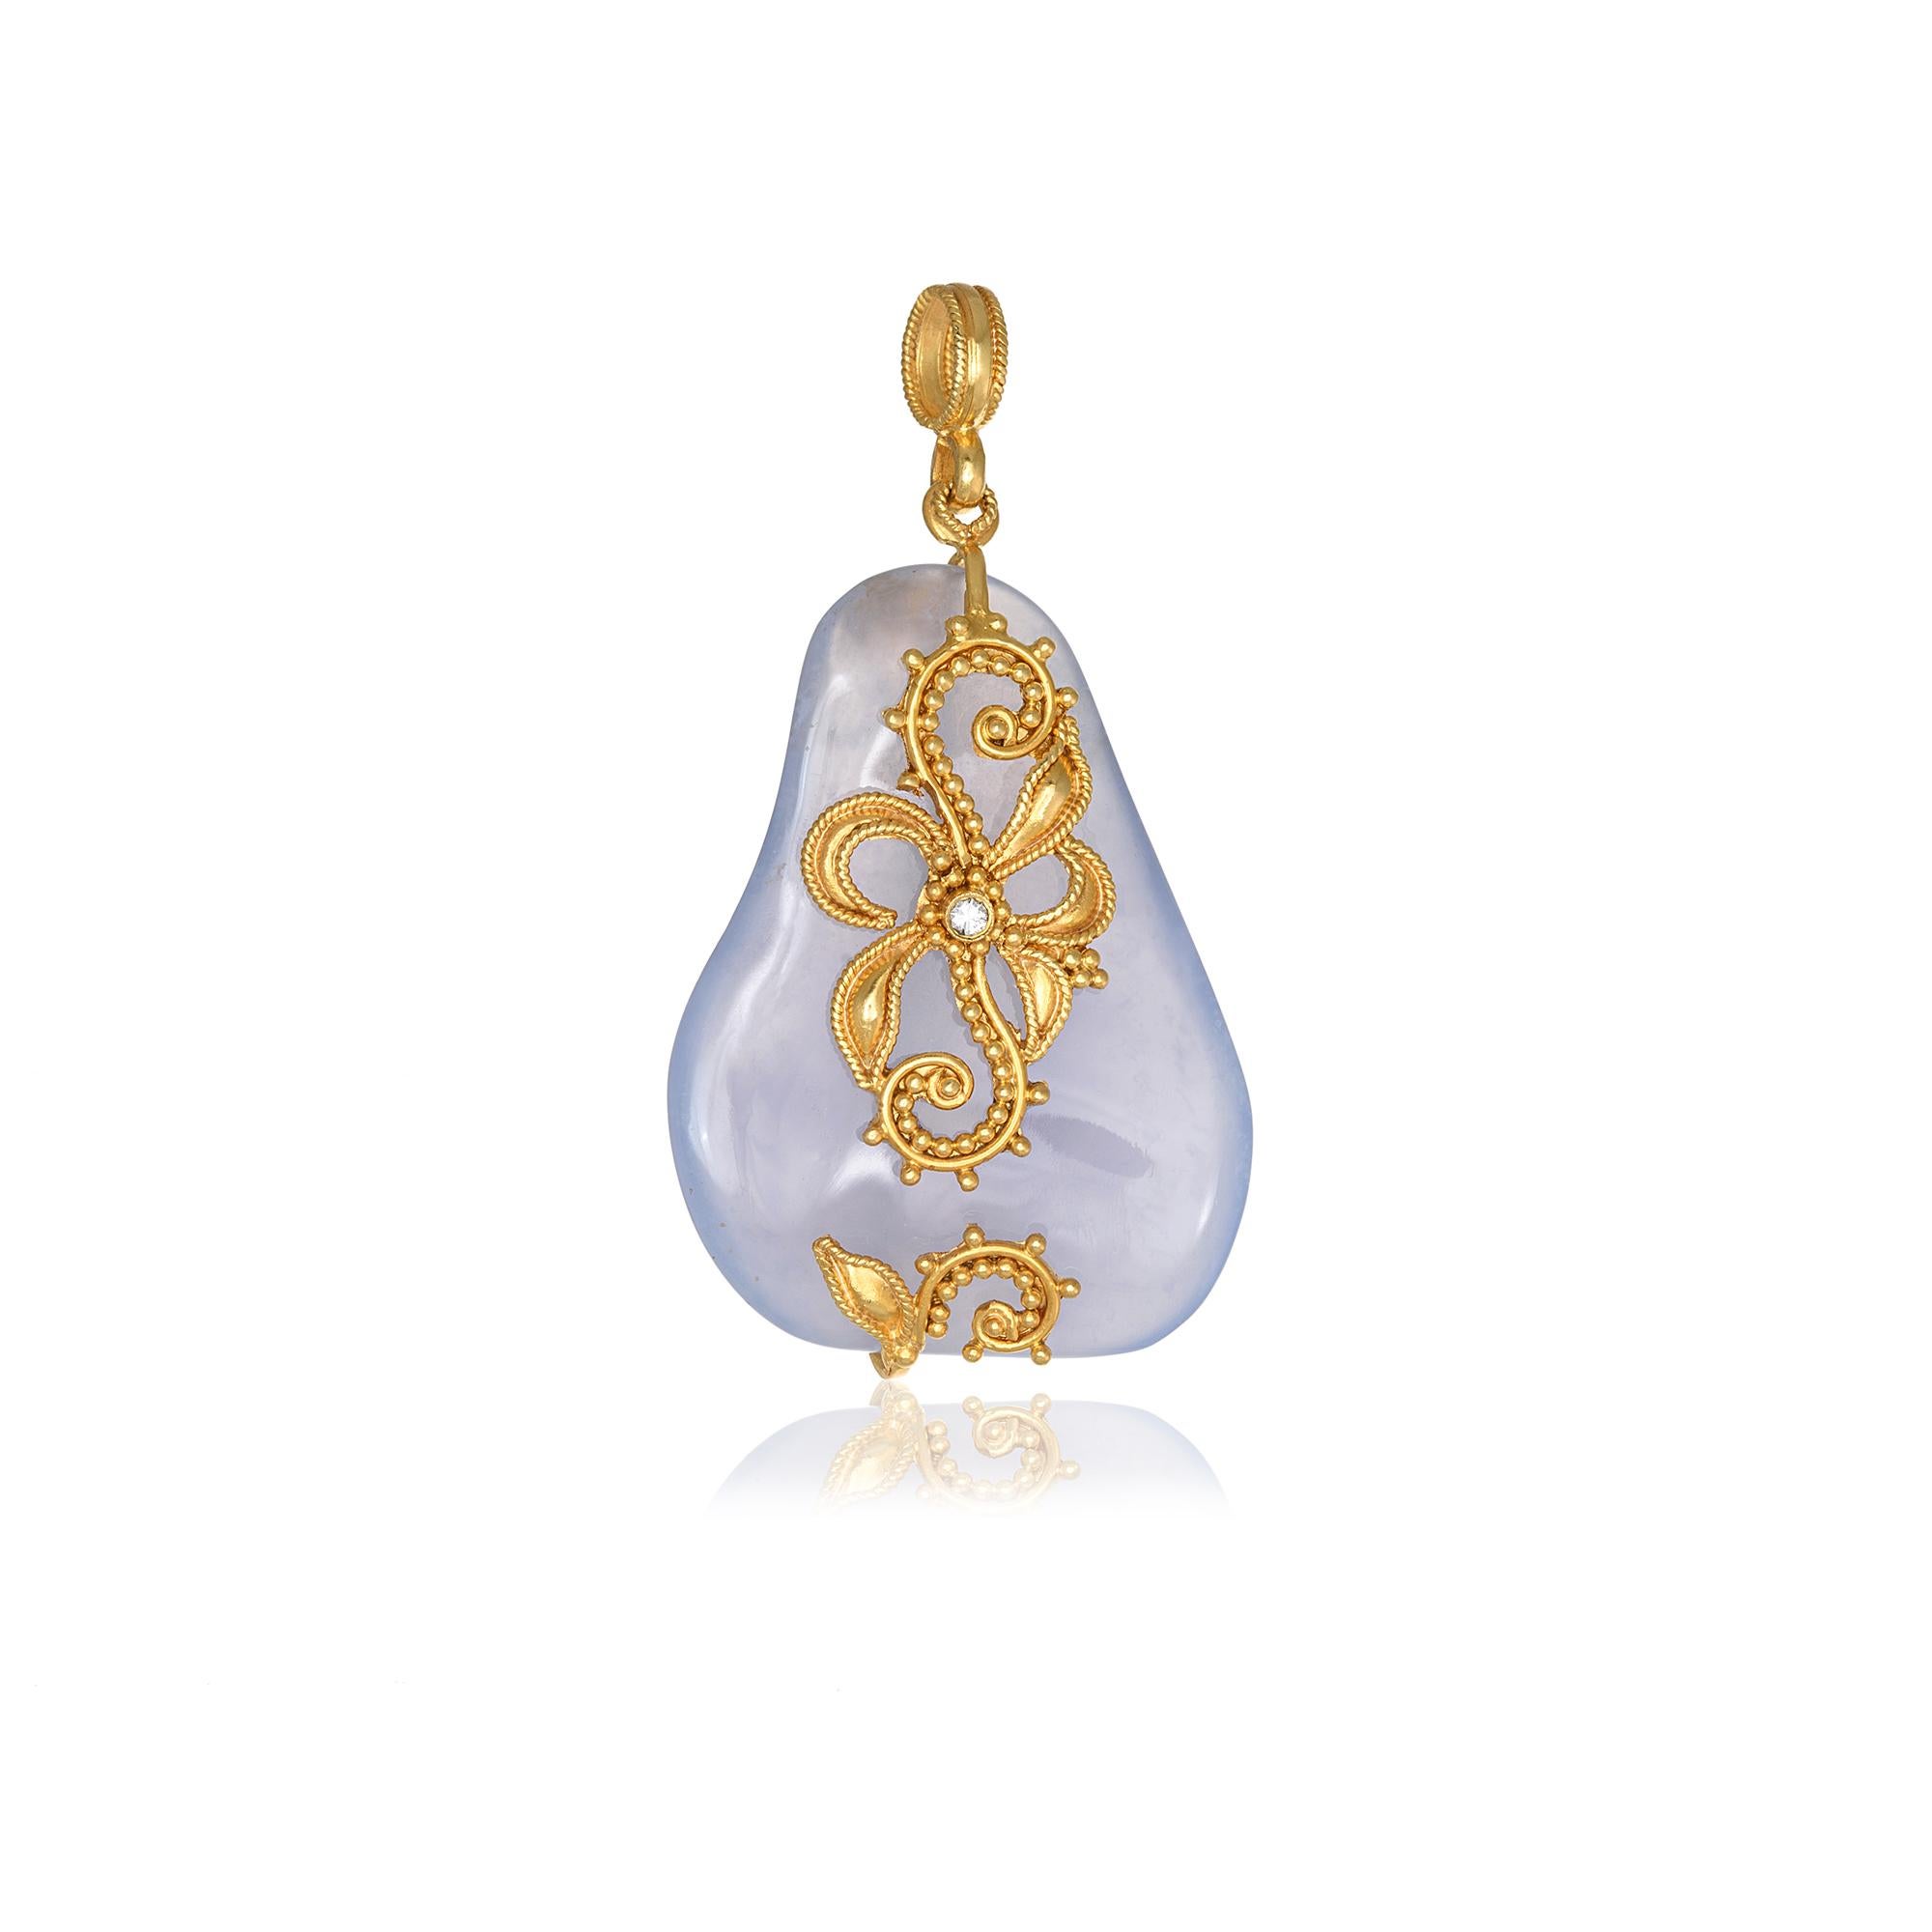 Pale Blue Chalcedony pendant handcrafted in 22Kt yellow gold with a brilliant cut diamond and gold flowers. This breathtaking jewelry piece is braided according to traditional techniques. The delicate and intricate wire ornamentation of Filigree and